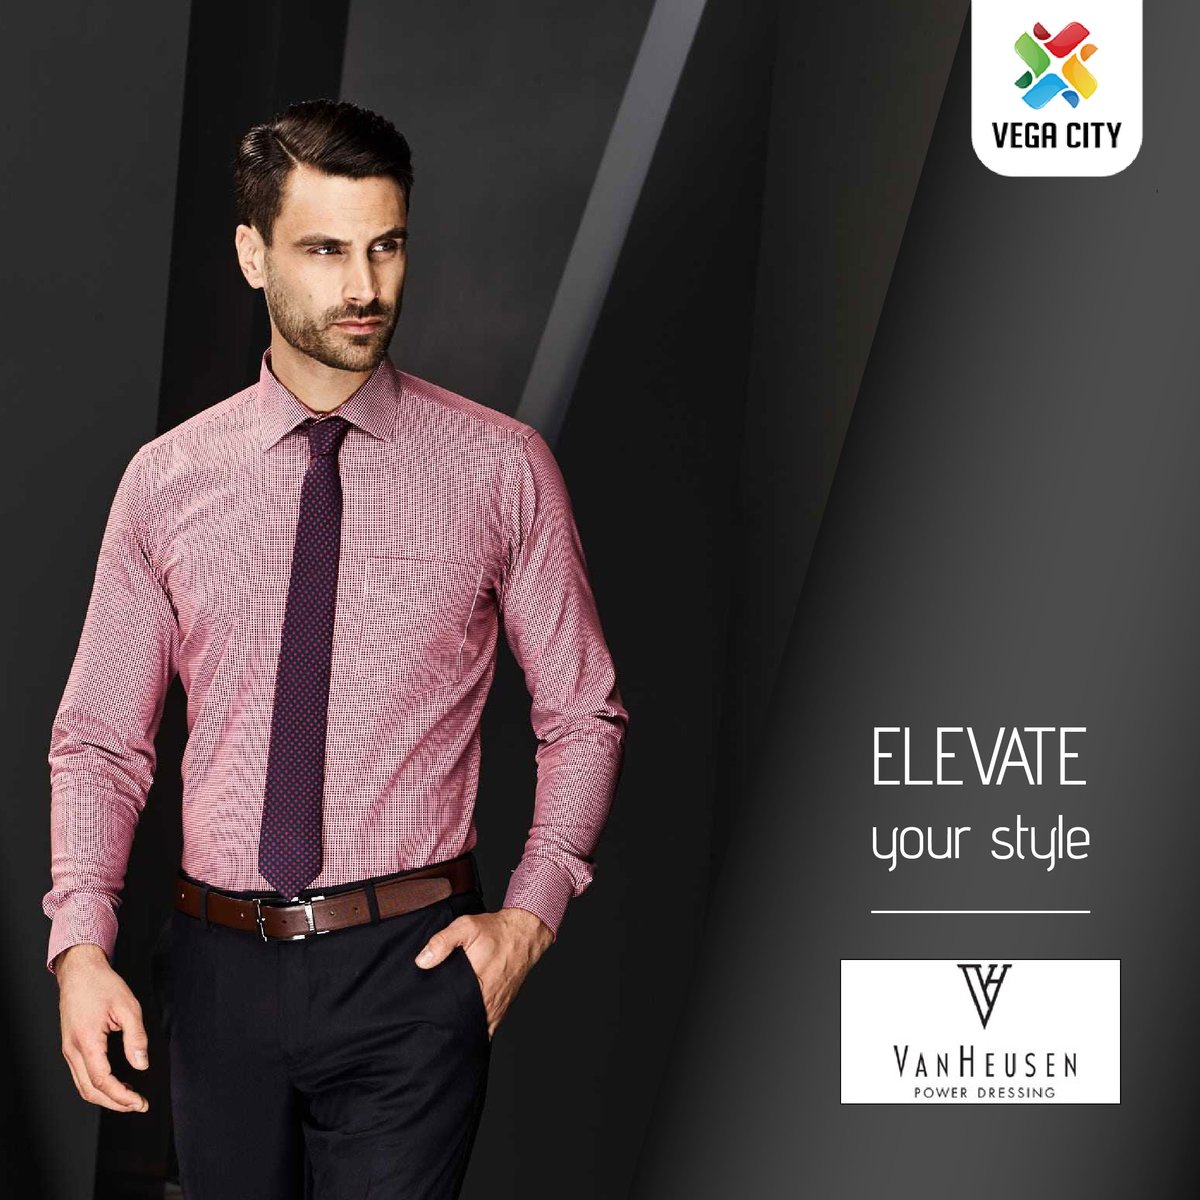 Looking to elevate your style game? #VanHeusen has sleek and sharp ensembles that will make you the power dresser you are. Walk into #VegaCity today to discover the collections that you love!

#VanHeusenIndia #Style #GameChanger #Clothing #Formals #Officewear #VegaCityMall